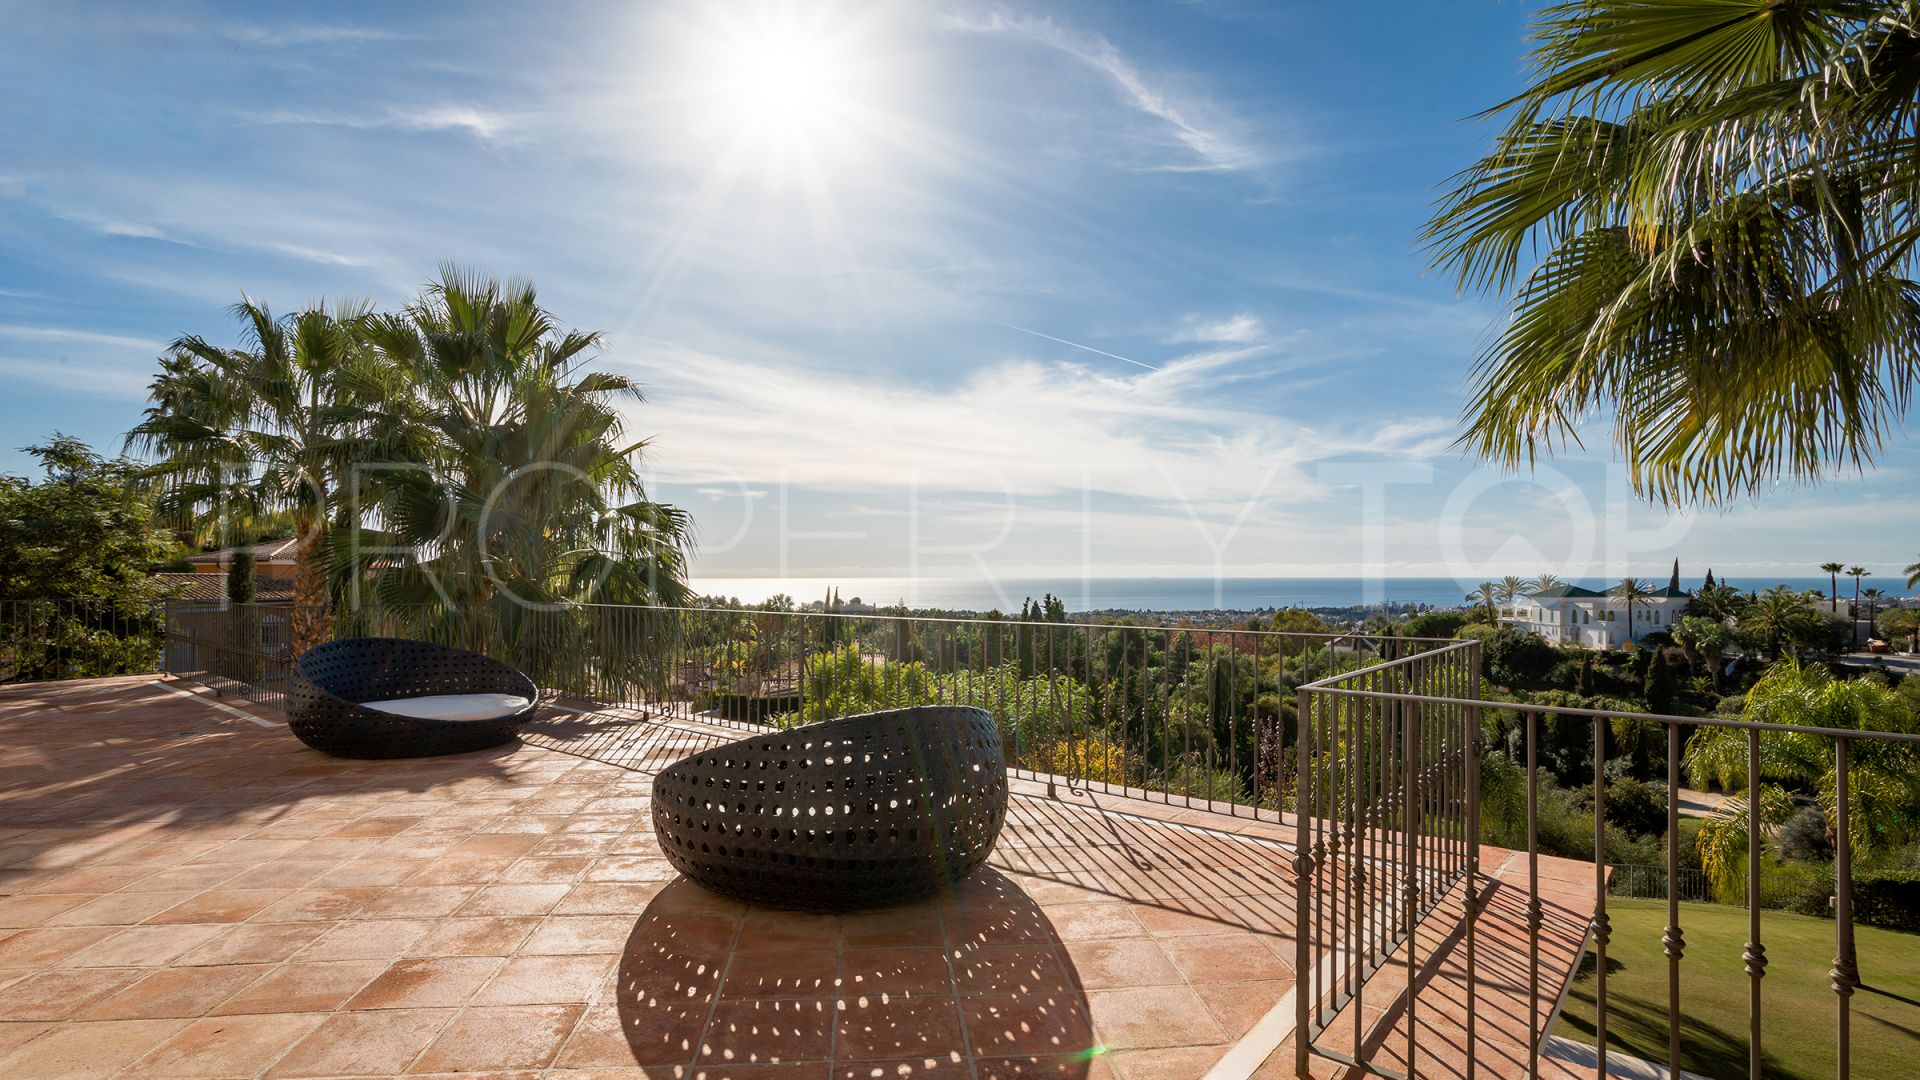 For sale villa in Marbella Hill Club with 7 bedrooms